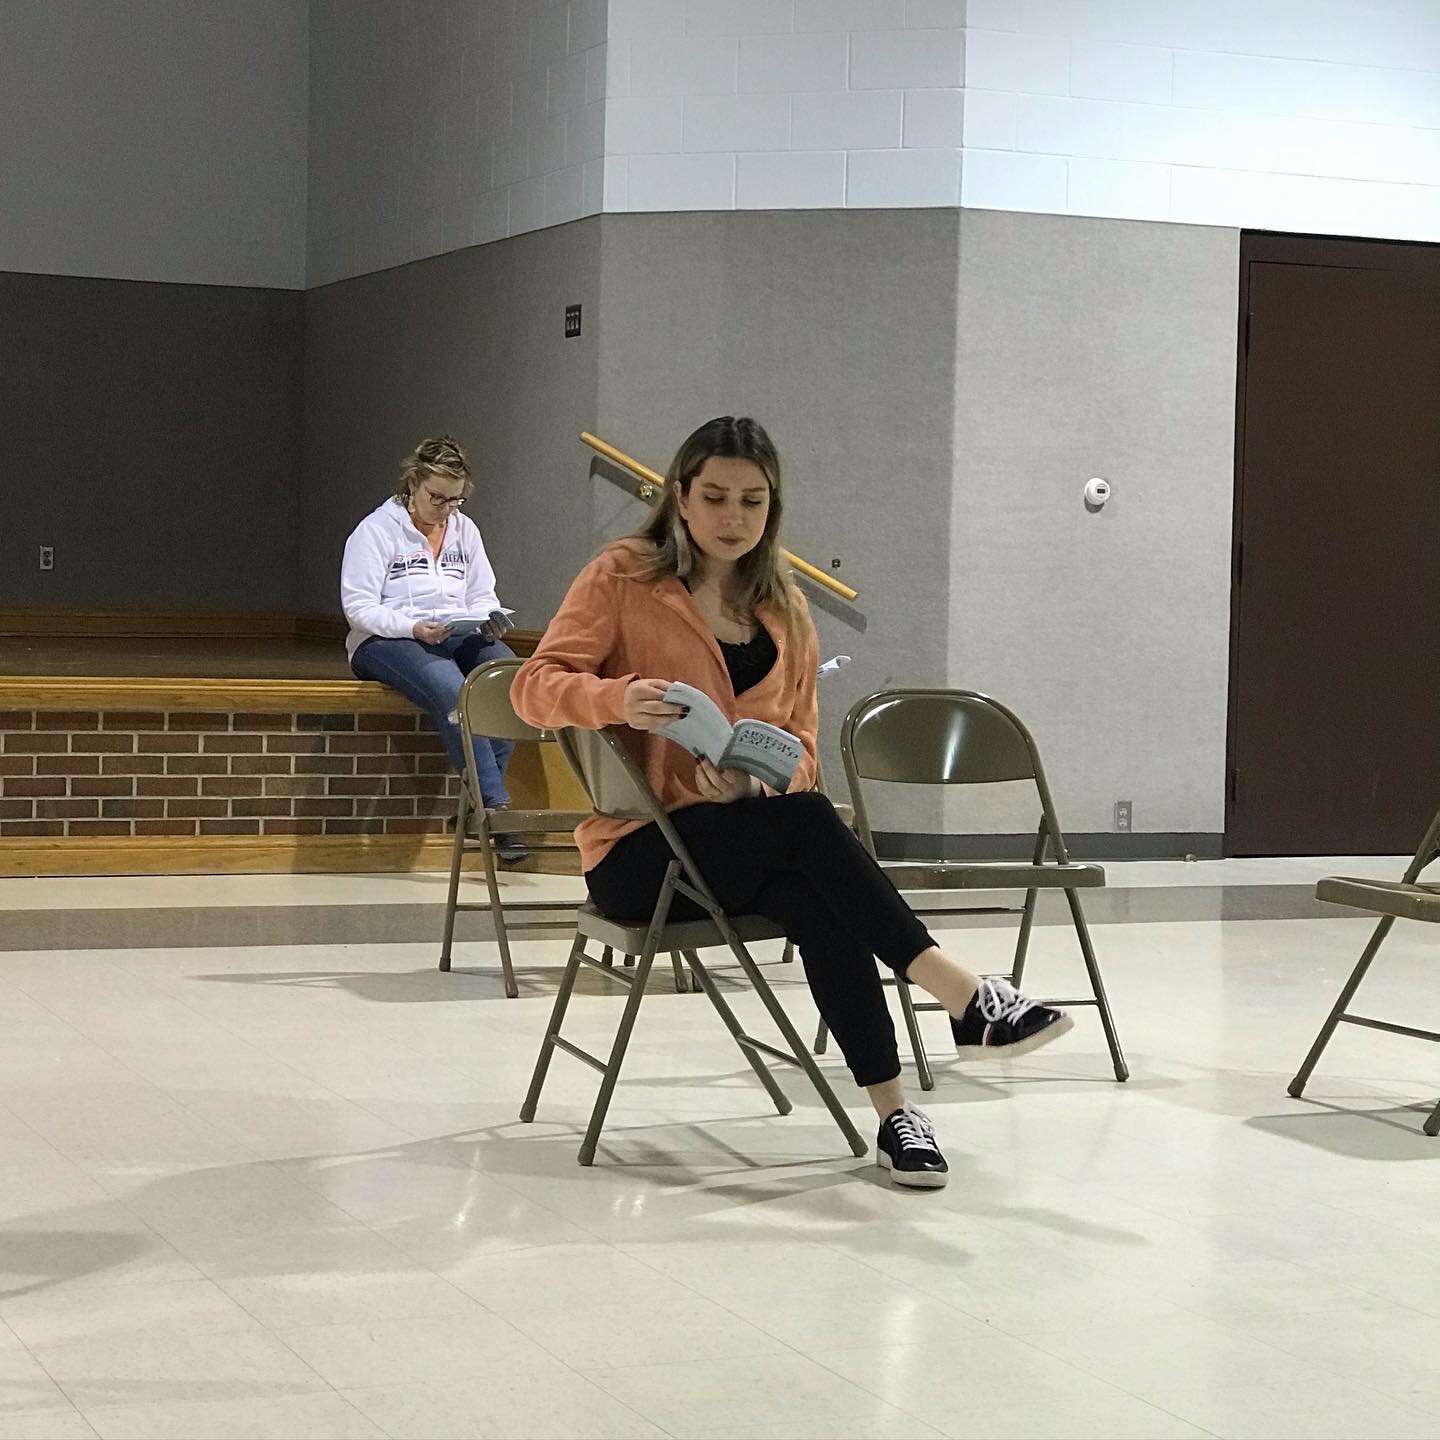 Leah Tipton (Elaine)rehearsing Arsenic and Old Lace earlier this week. Angela Runyan (Martha) is in the background. #experienceelkhartcoin #wellcrafted #communitytheatre